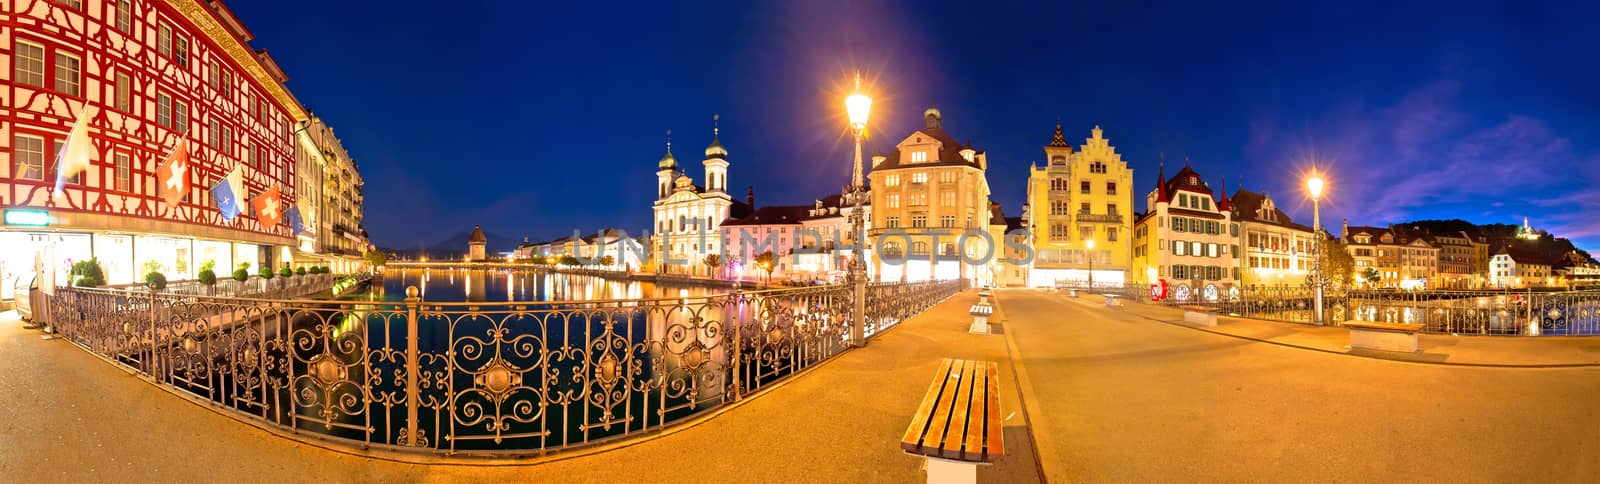 Luzern panoramic evening view of famous landmarks and Reuss river, central Switzerland